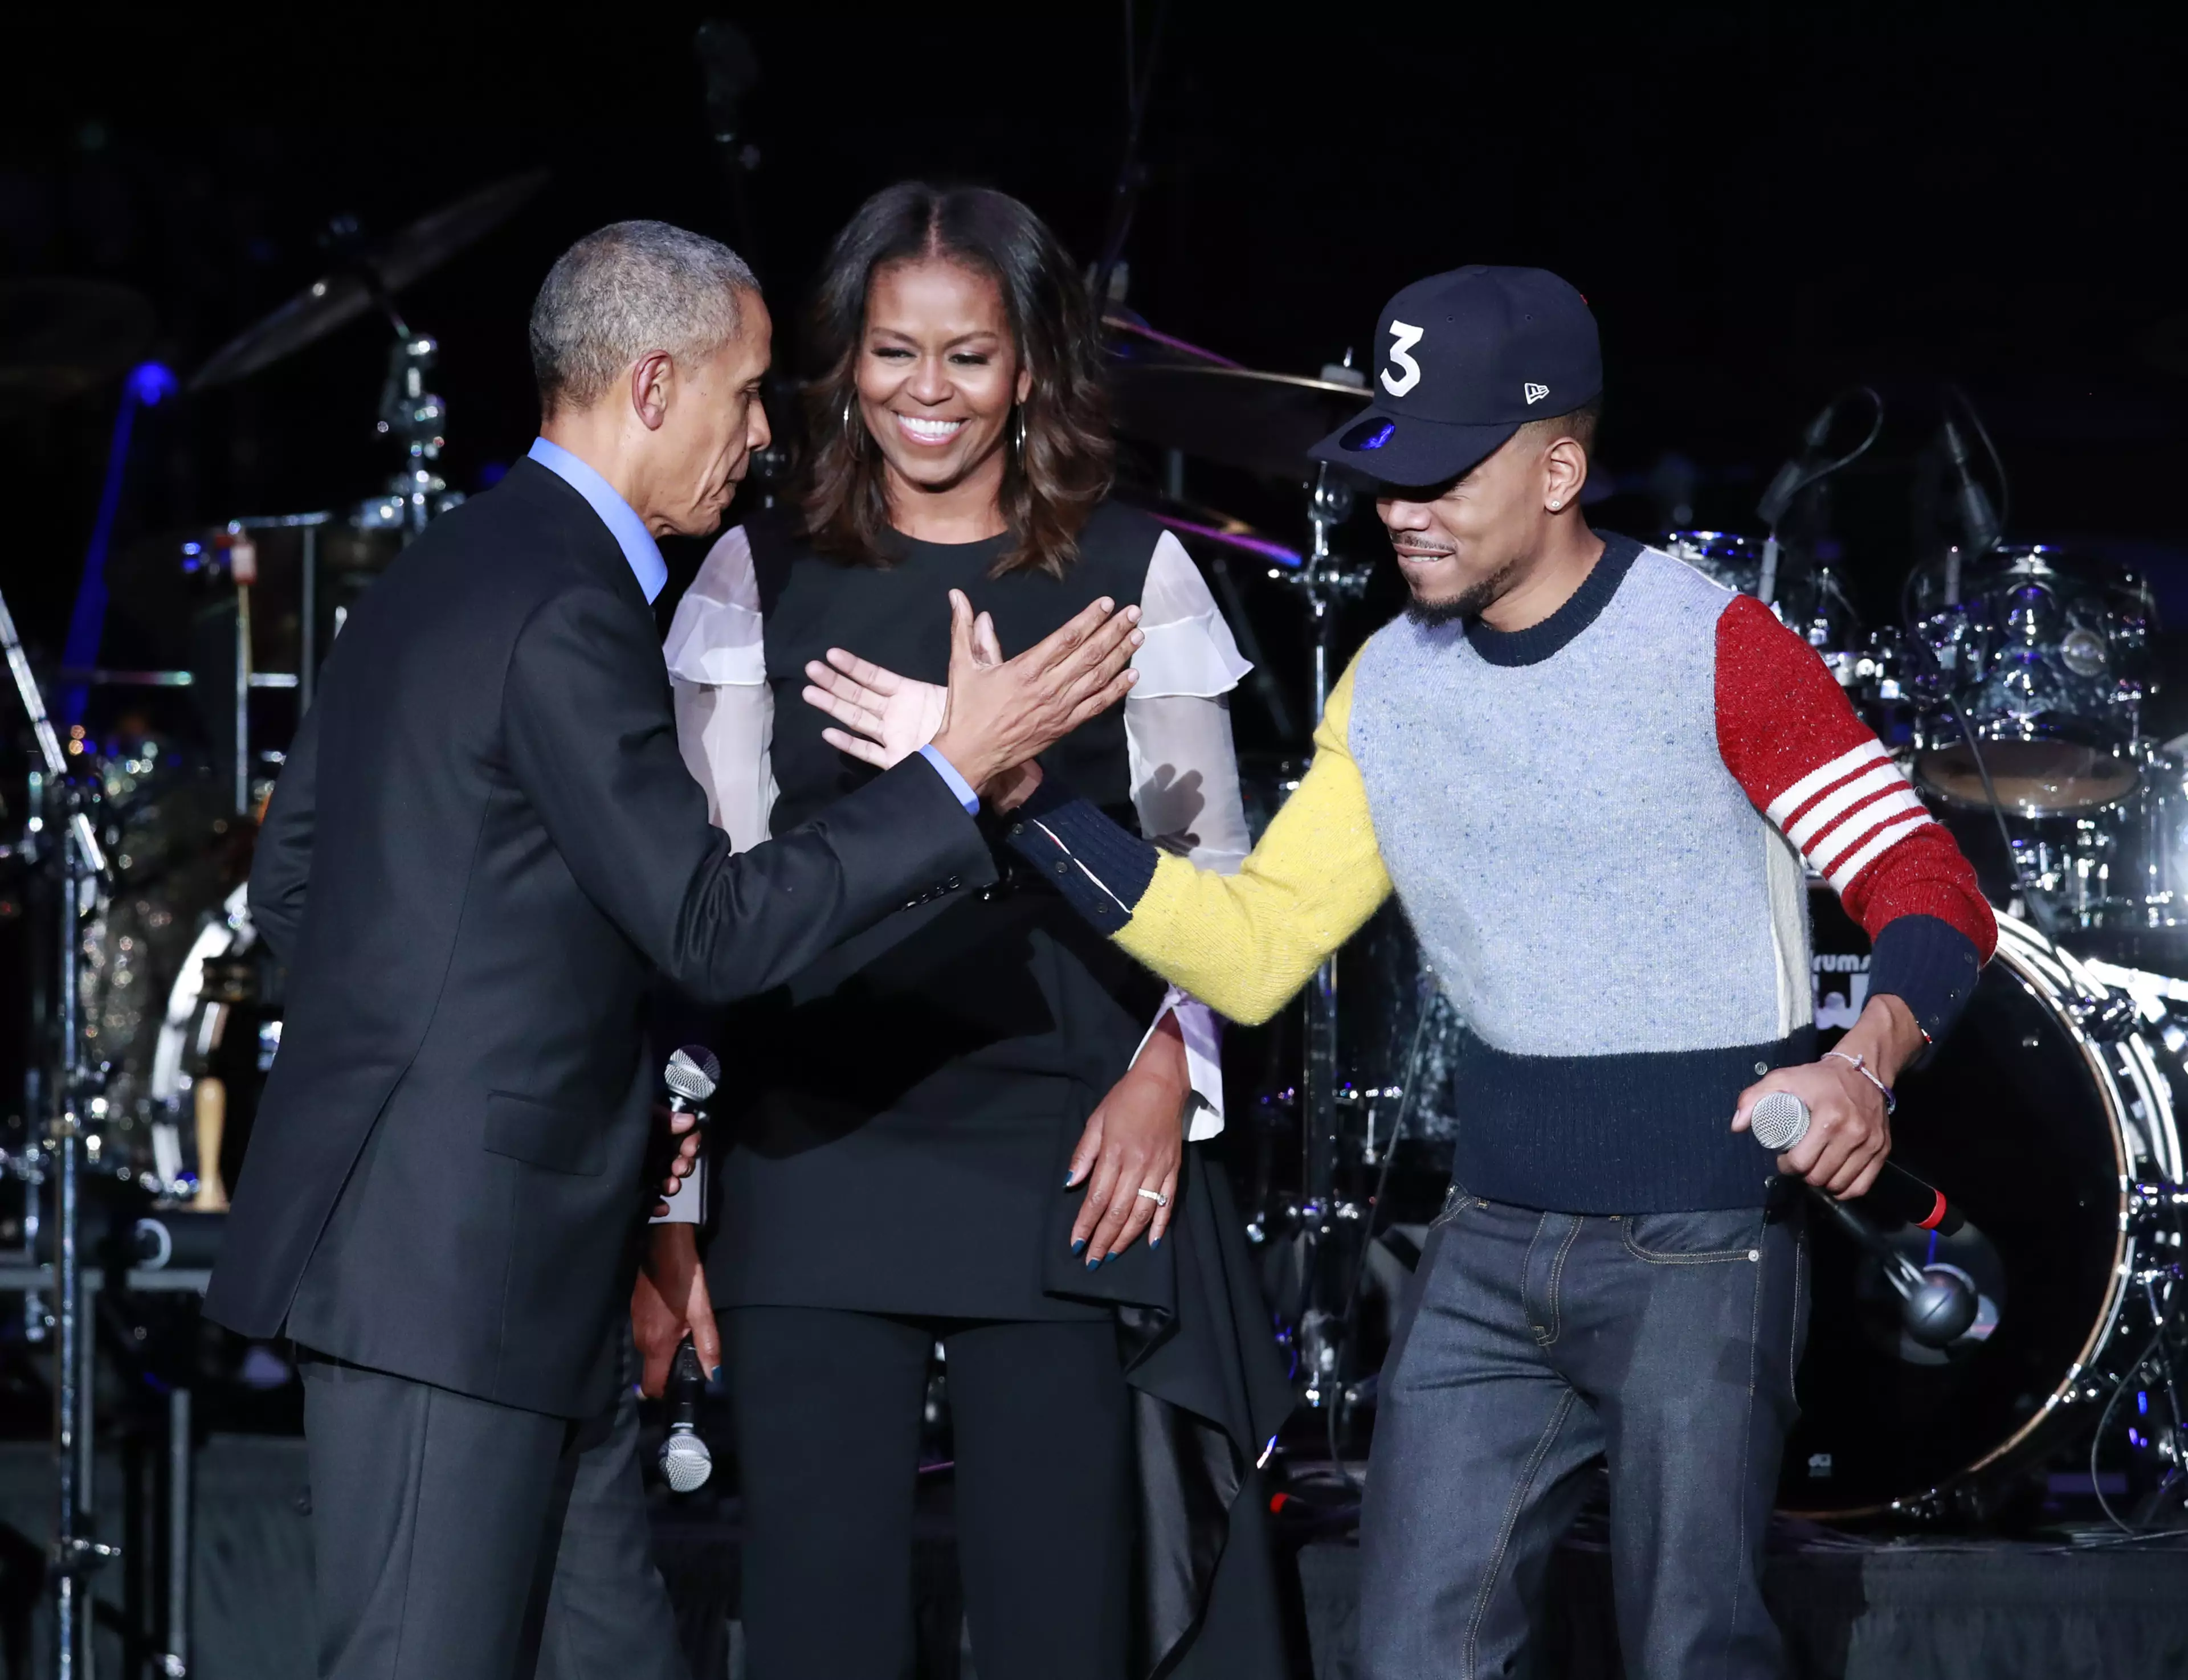 Barack and Michelle Obama with Chance the Rapper.